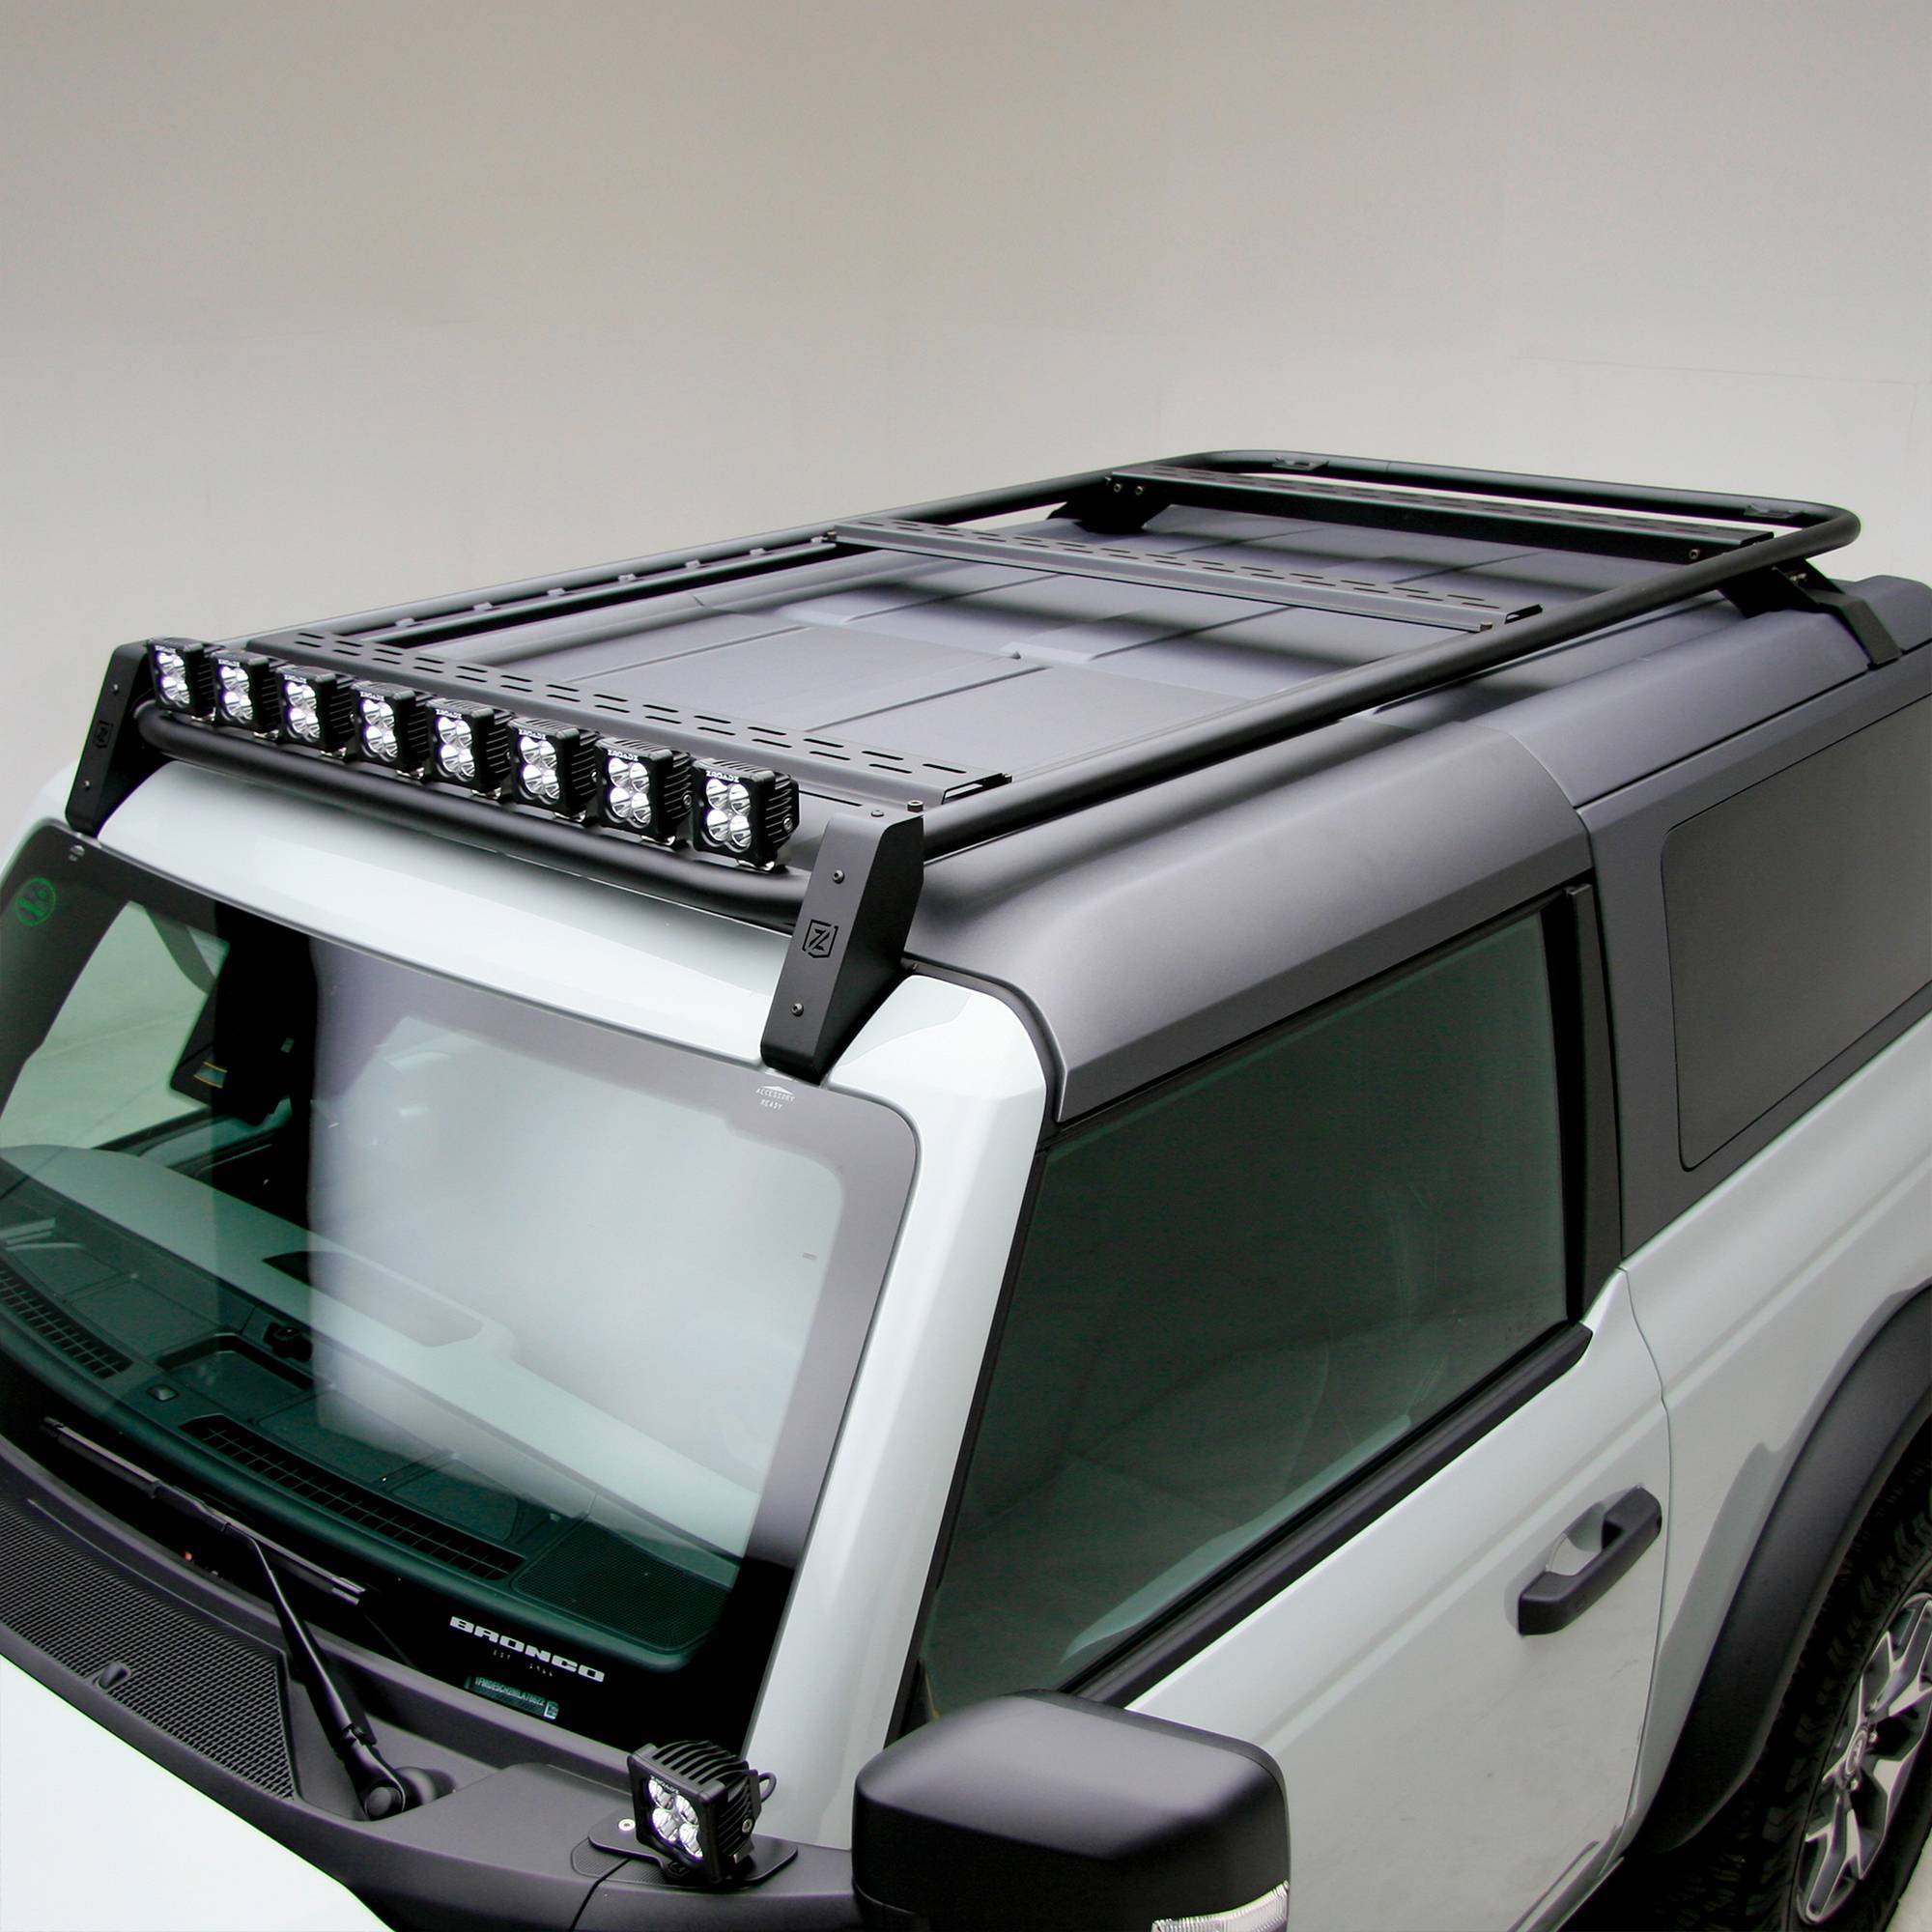 ZROADZ OFF ROAD PRODUCTS - 2021-2022 Ford Bronco 2 Door Roof Rack KIT, Includes (6) 3 inch ZROADZ White and (2) Amber LED Pods Lights - Part # Z845211